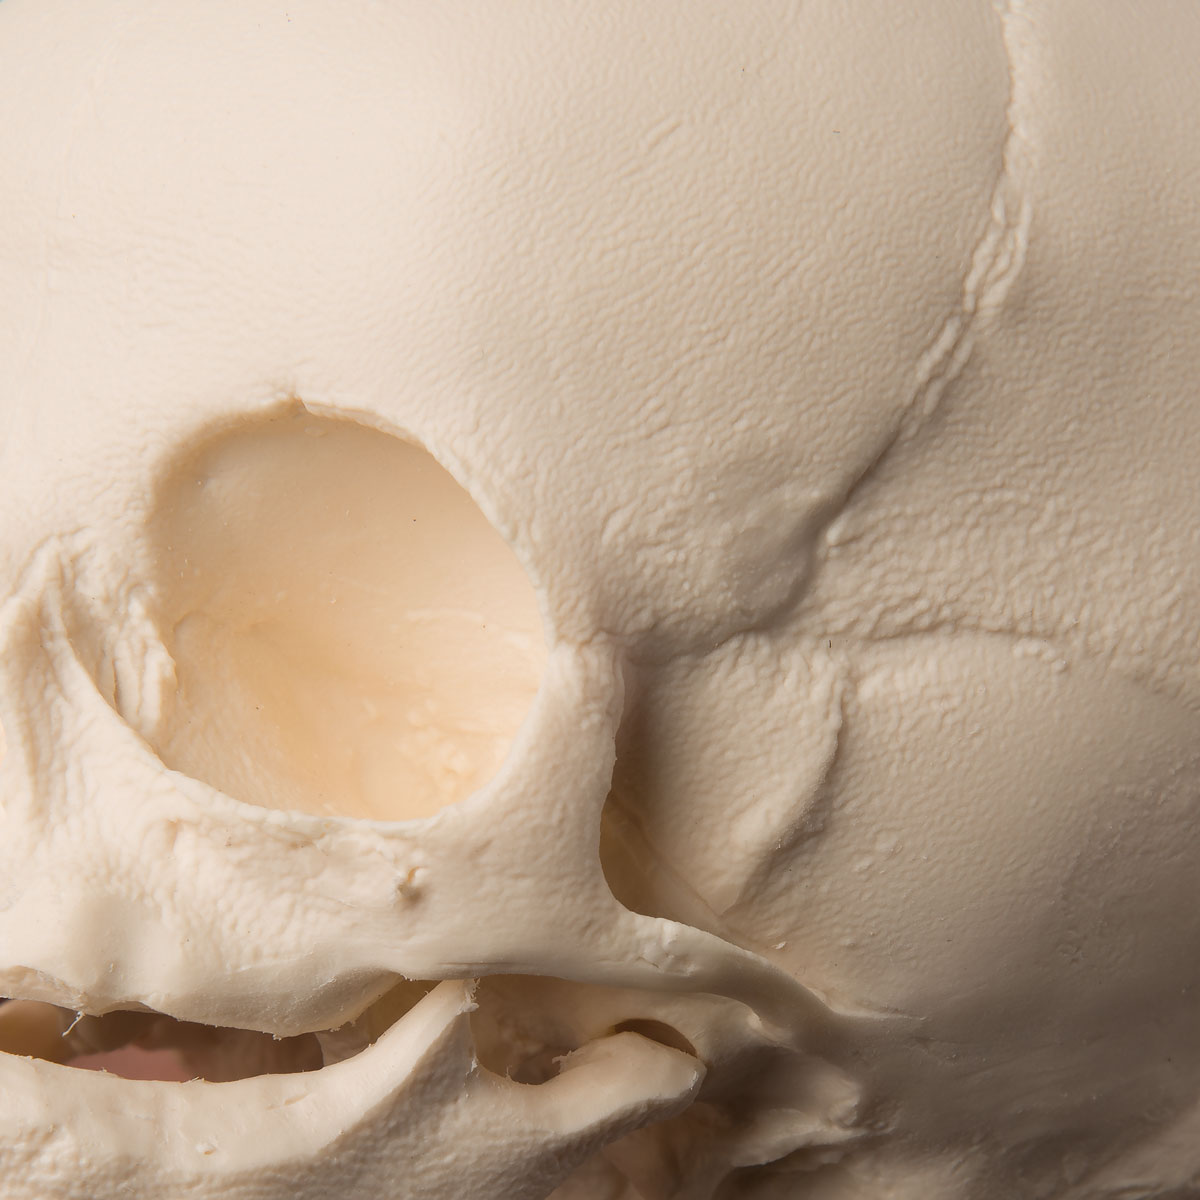 Model of a fetal skull with fontanelles corresponding to pregnancy week 30